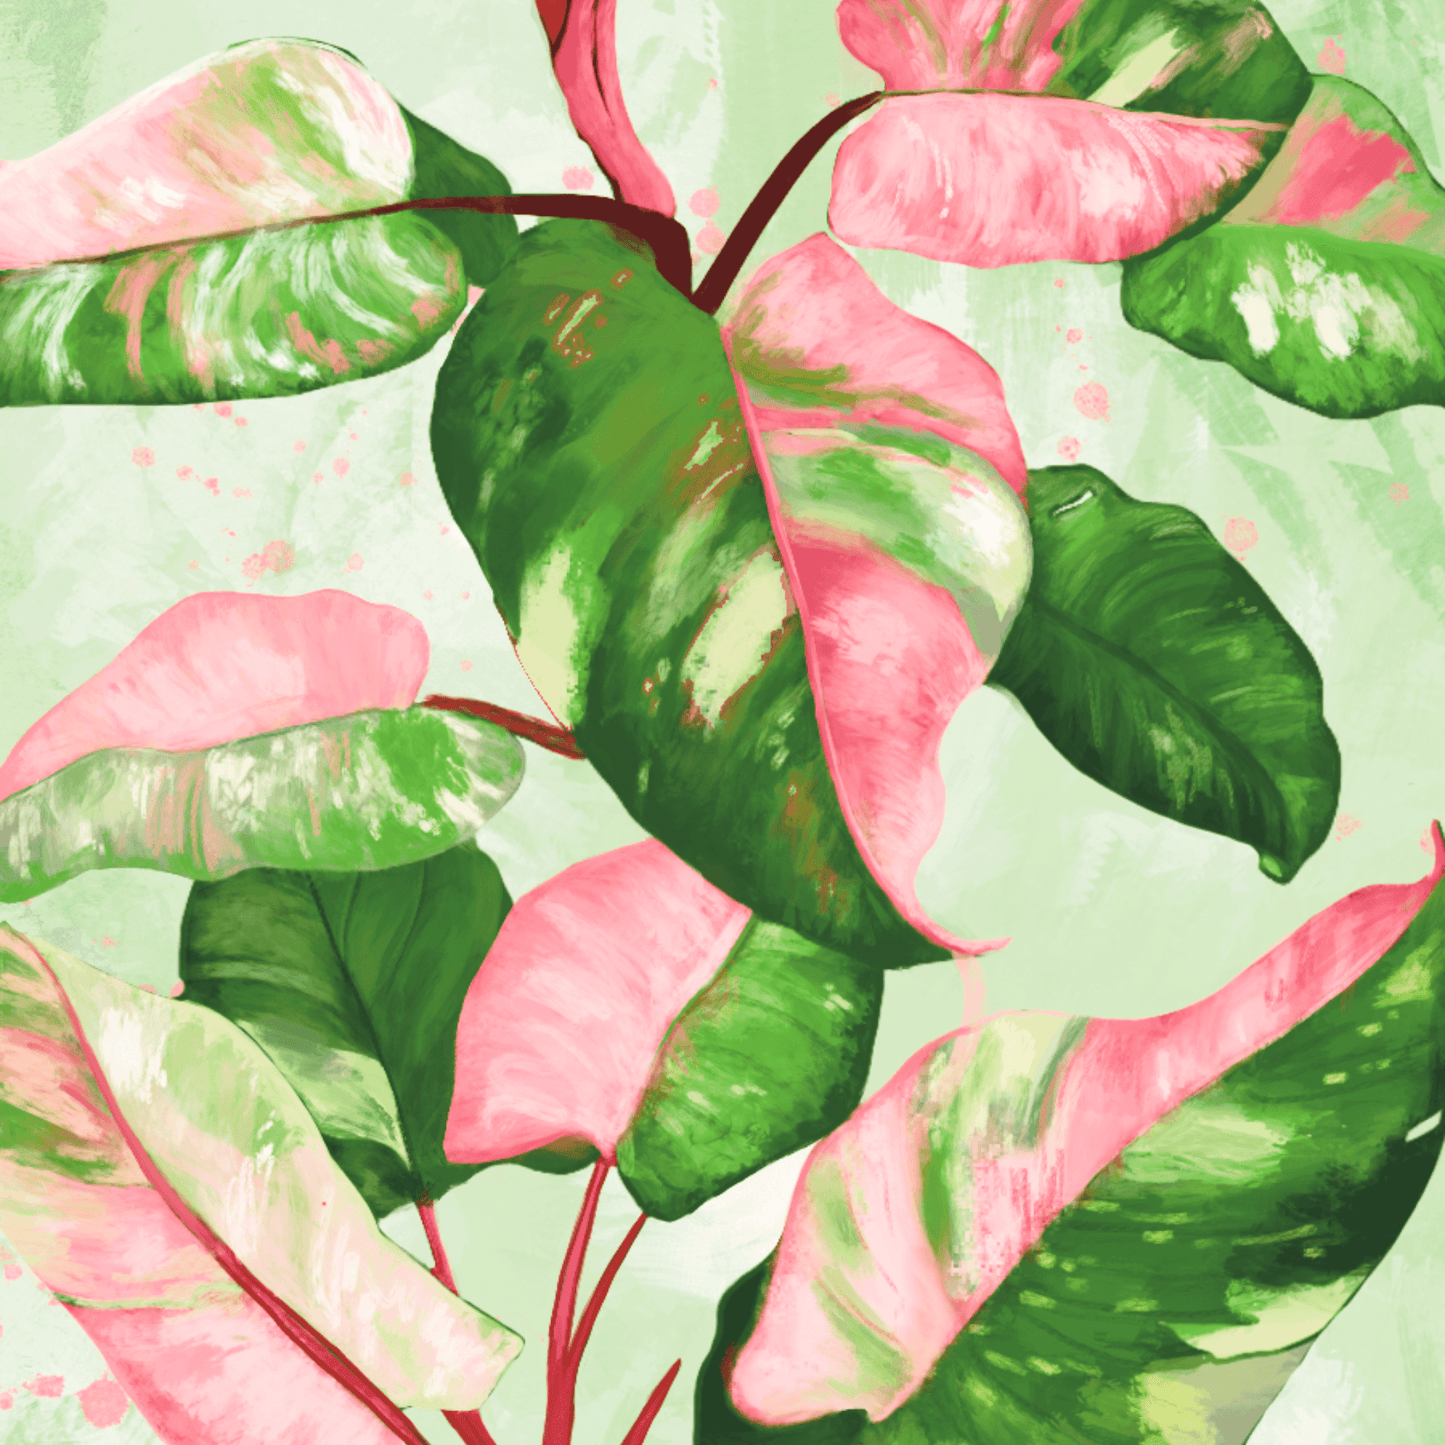 Philodendron Pink Pricess- UV print on a wooden cell phone holder (iPhone Android).